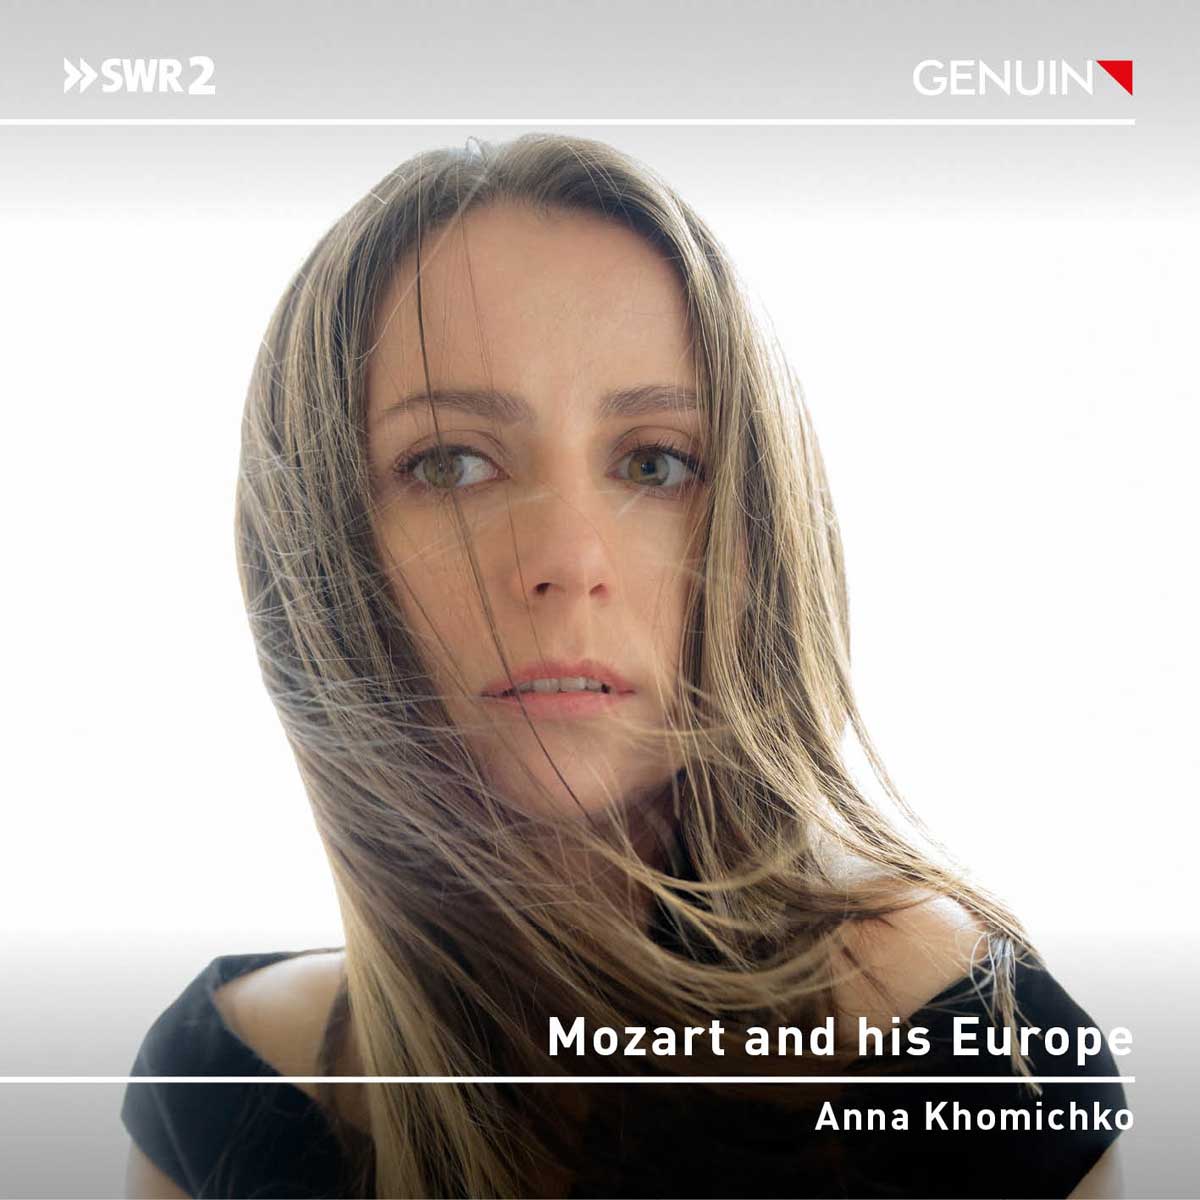 CD album cover 'Mozart and his Europe' (GEN 23841) with Anna Khomichko